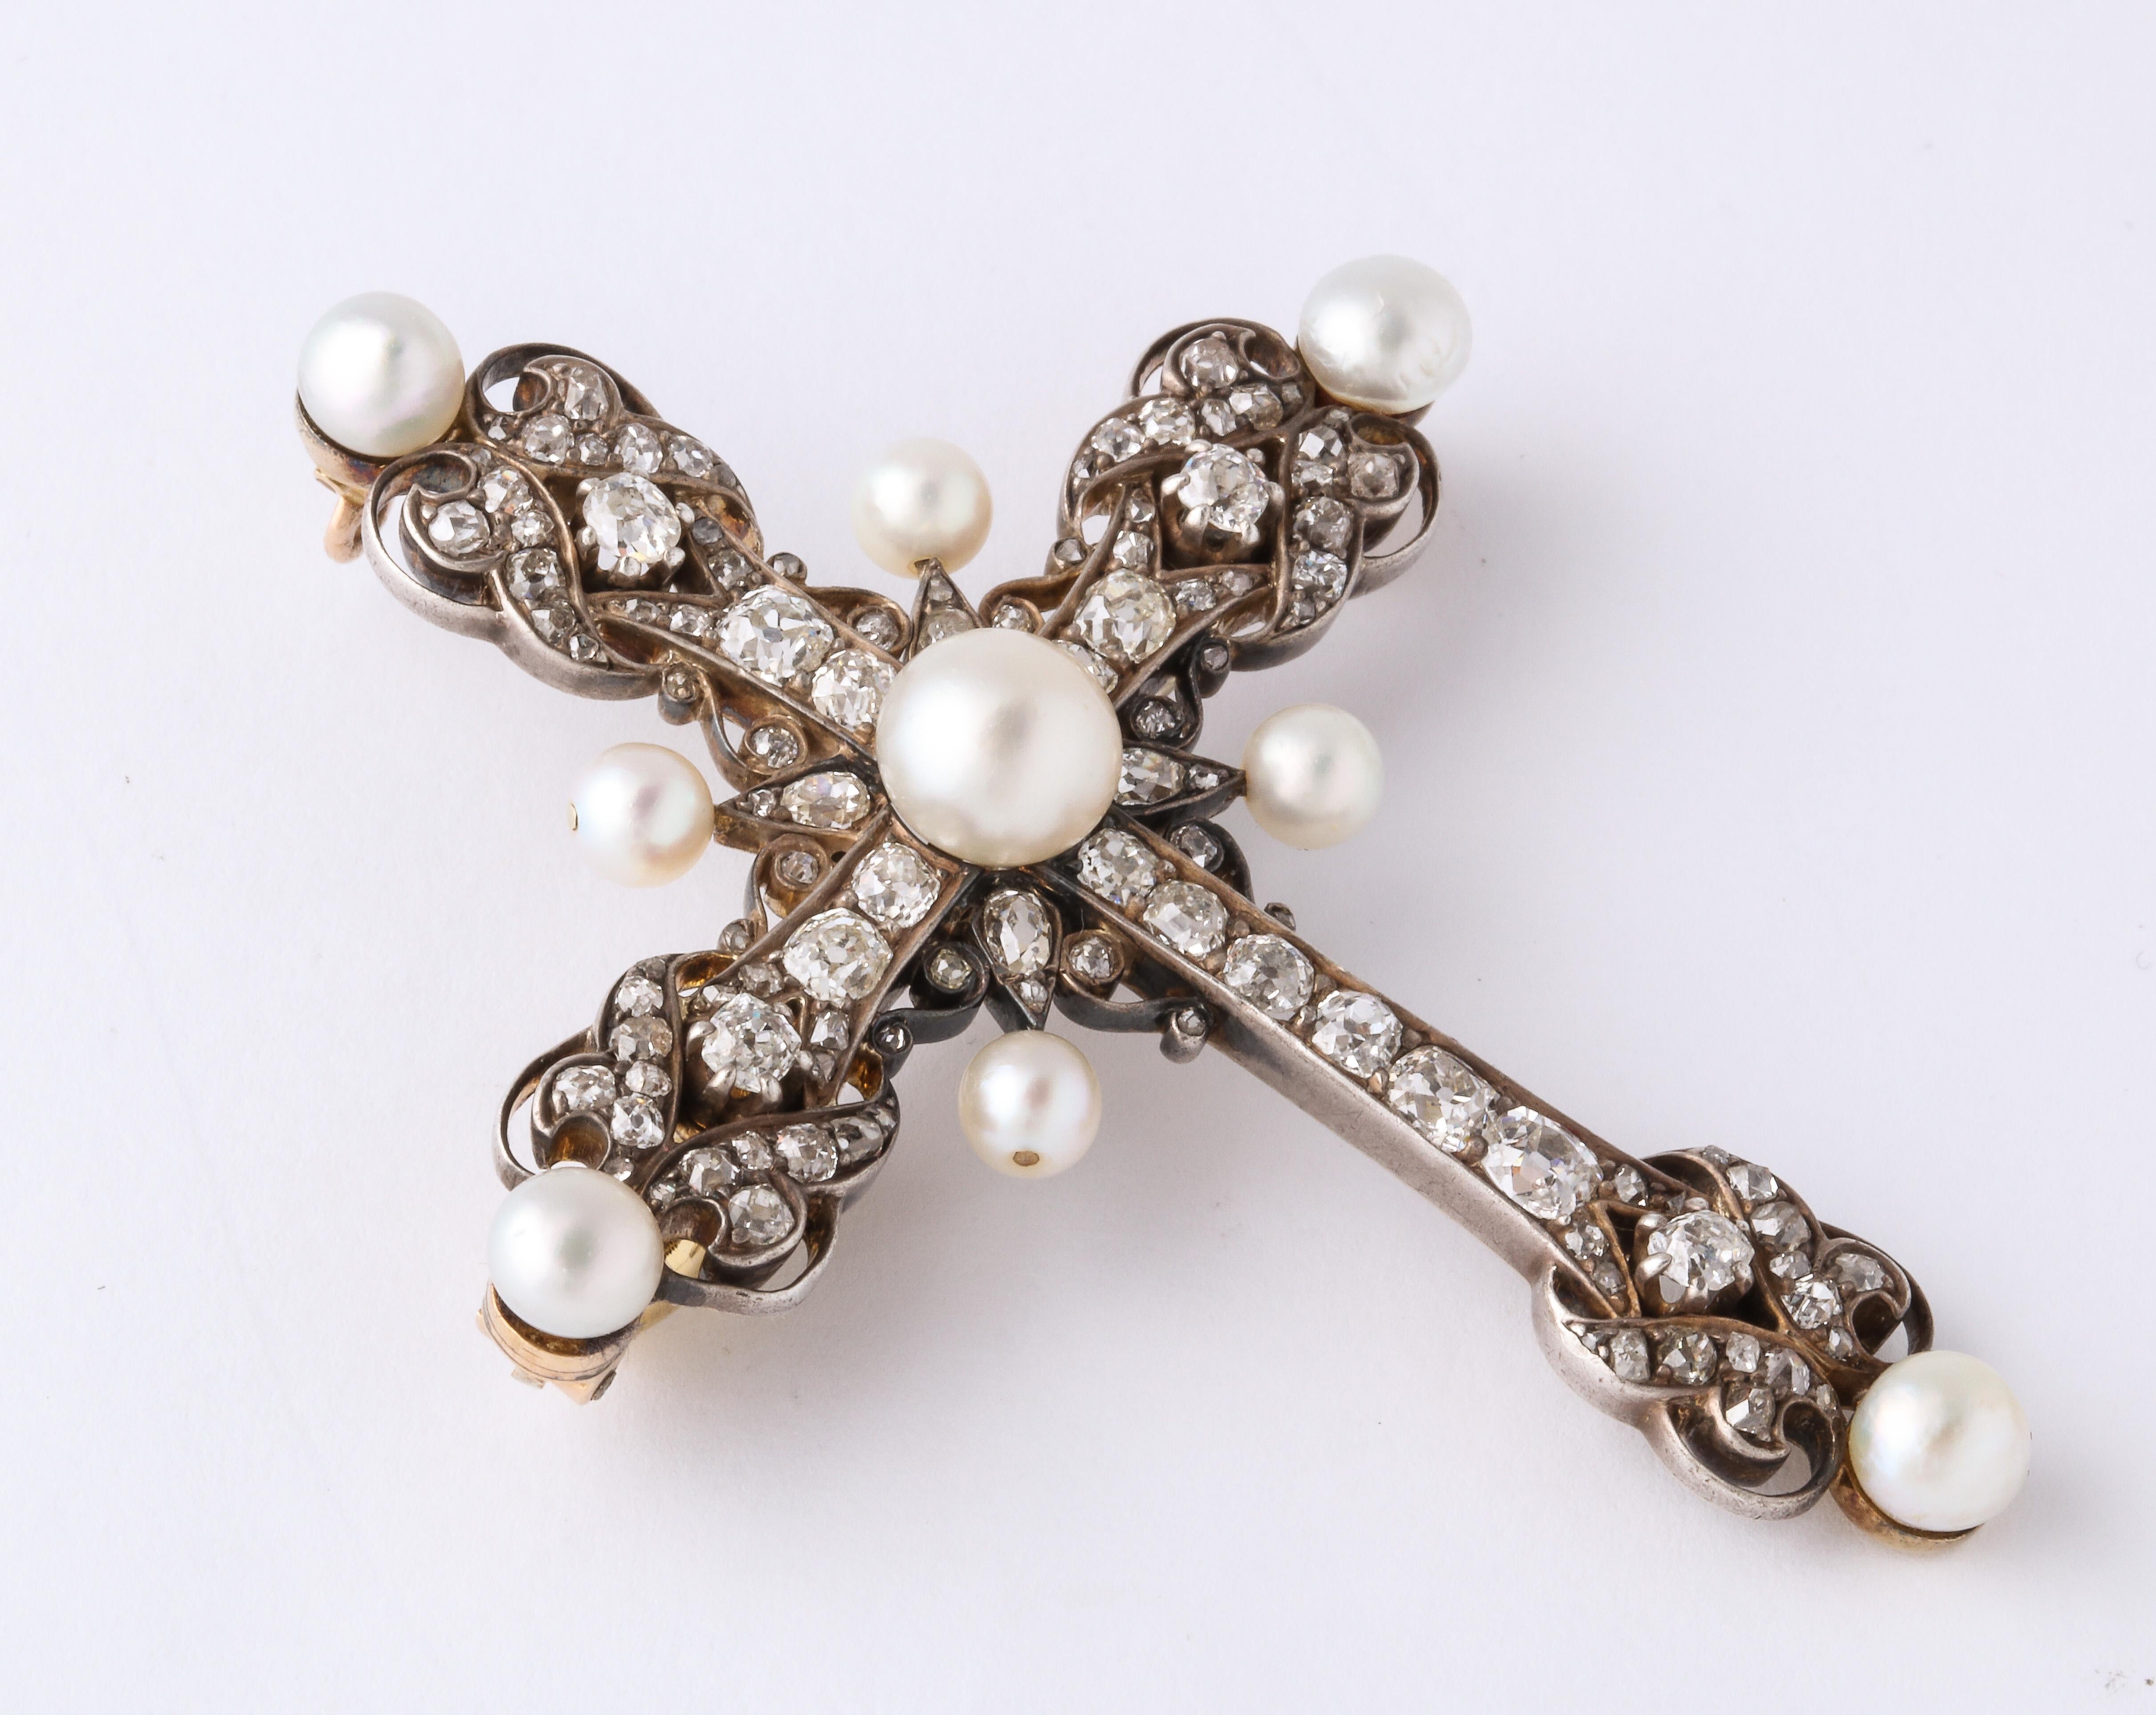 Antique Pearl and Diamond cross pendant pin, circa 1880.  14K White Gold with 85 old mine cut round diamonds totaling approximately 6.0 carats and 9 natural pearls.   1/2 inch high x 2 inches wide x 1/4 